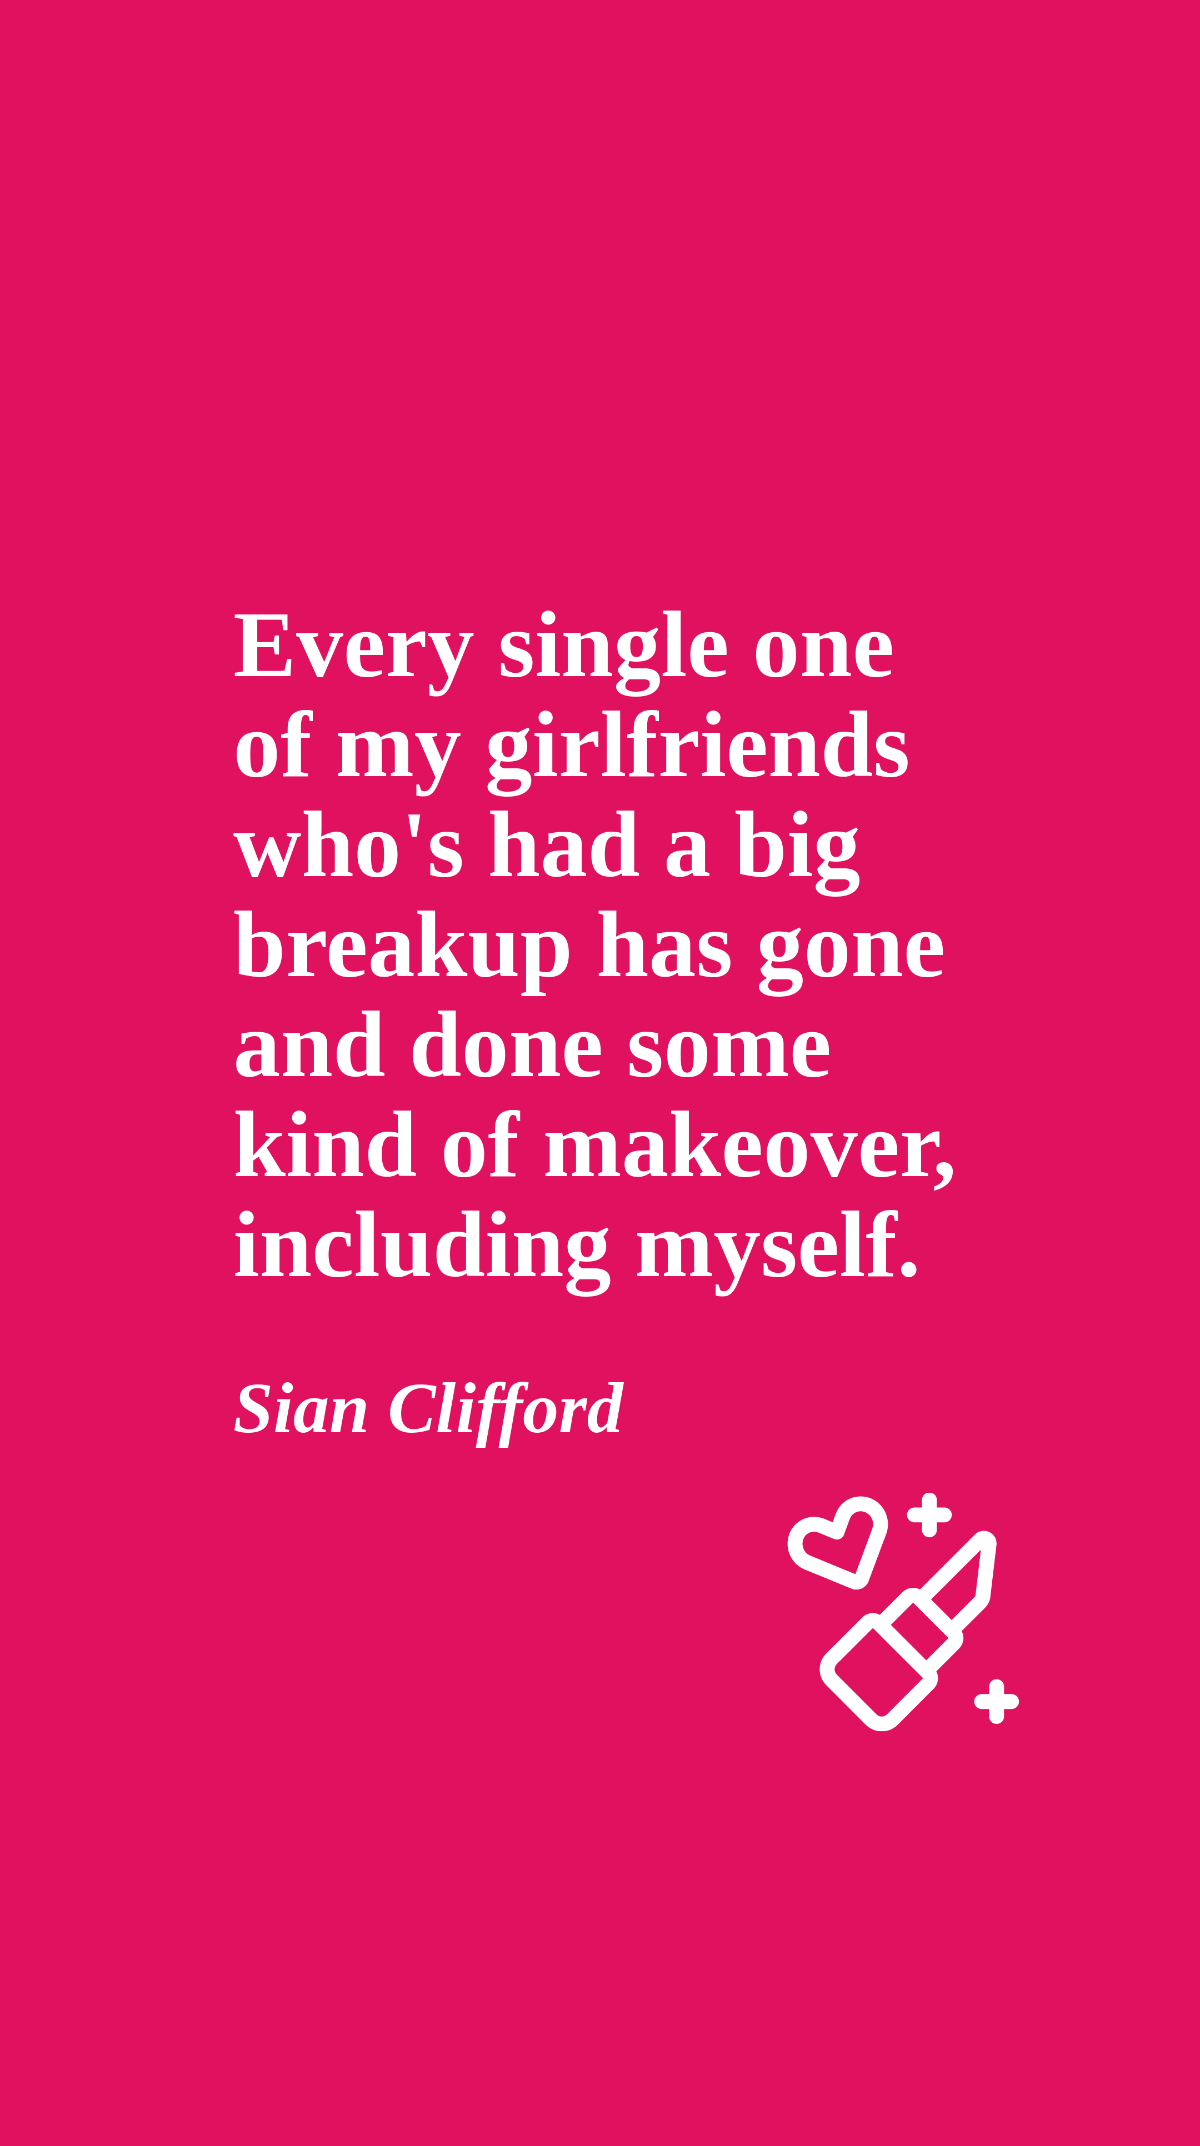 Free Sian Clifford - Every single one of my girlfriends who's had a big breakup has gone and done some kind of makeover, including myself. Template